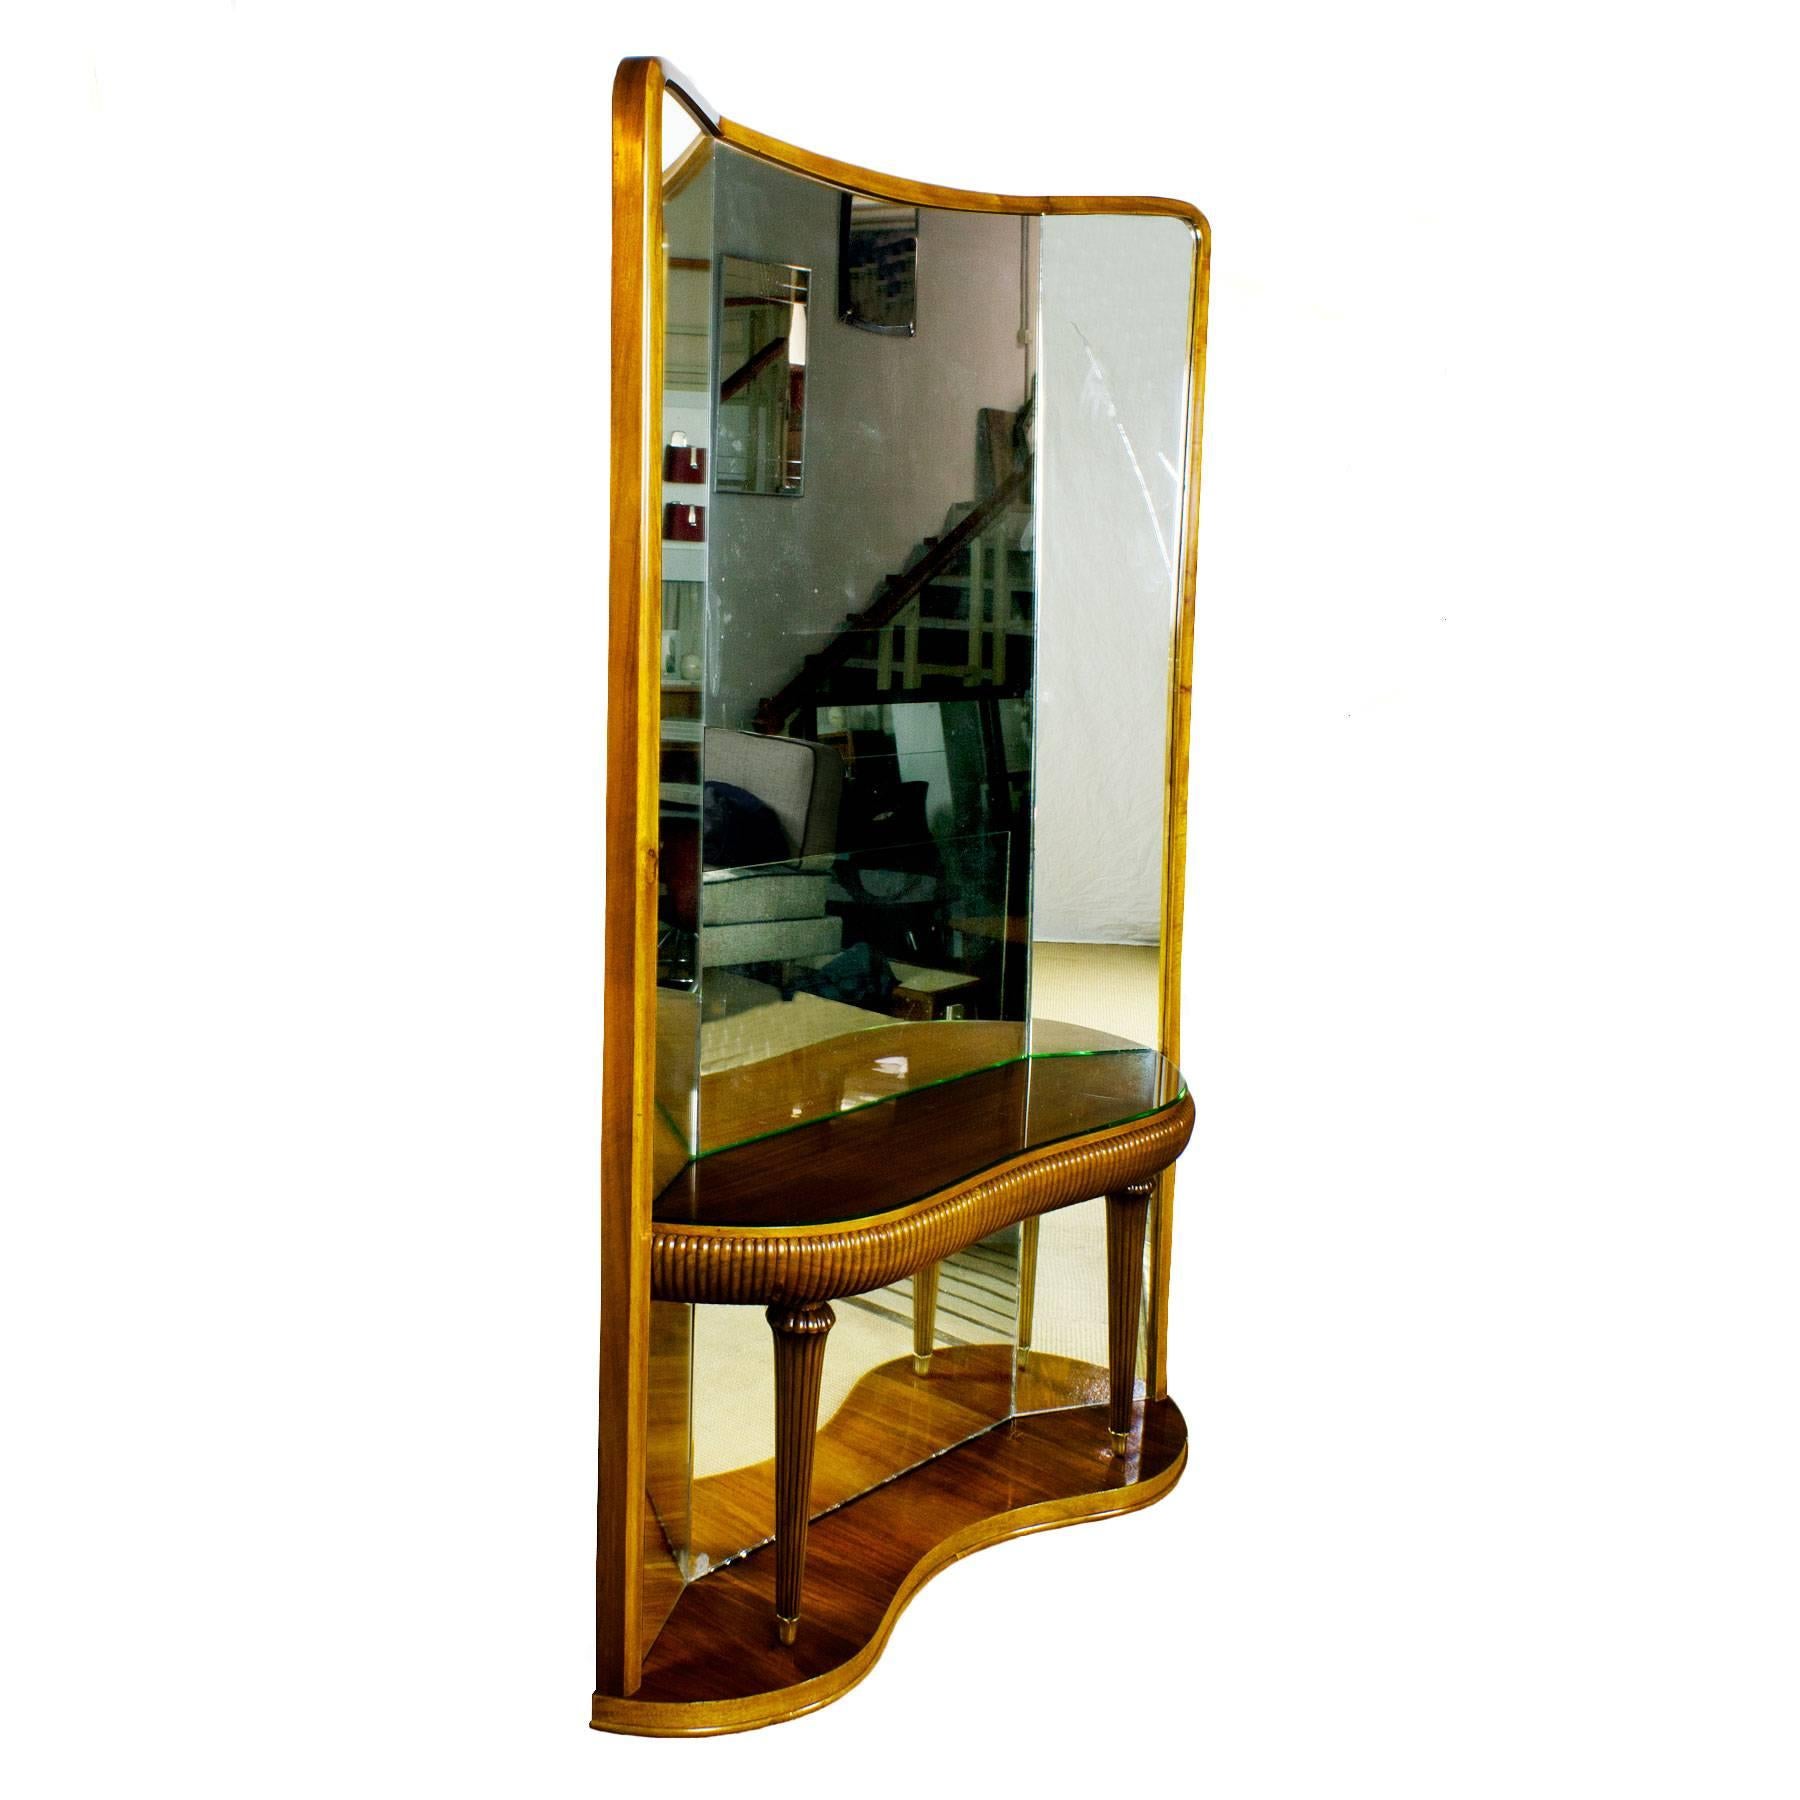 Console - mirror, shellacked solid walnut and walnut veneer with wax finition. Fluted stands and edging. Polished brass feet. Original glass on top. Original mirrors (oxidation and defauts).

Italy circa 1940